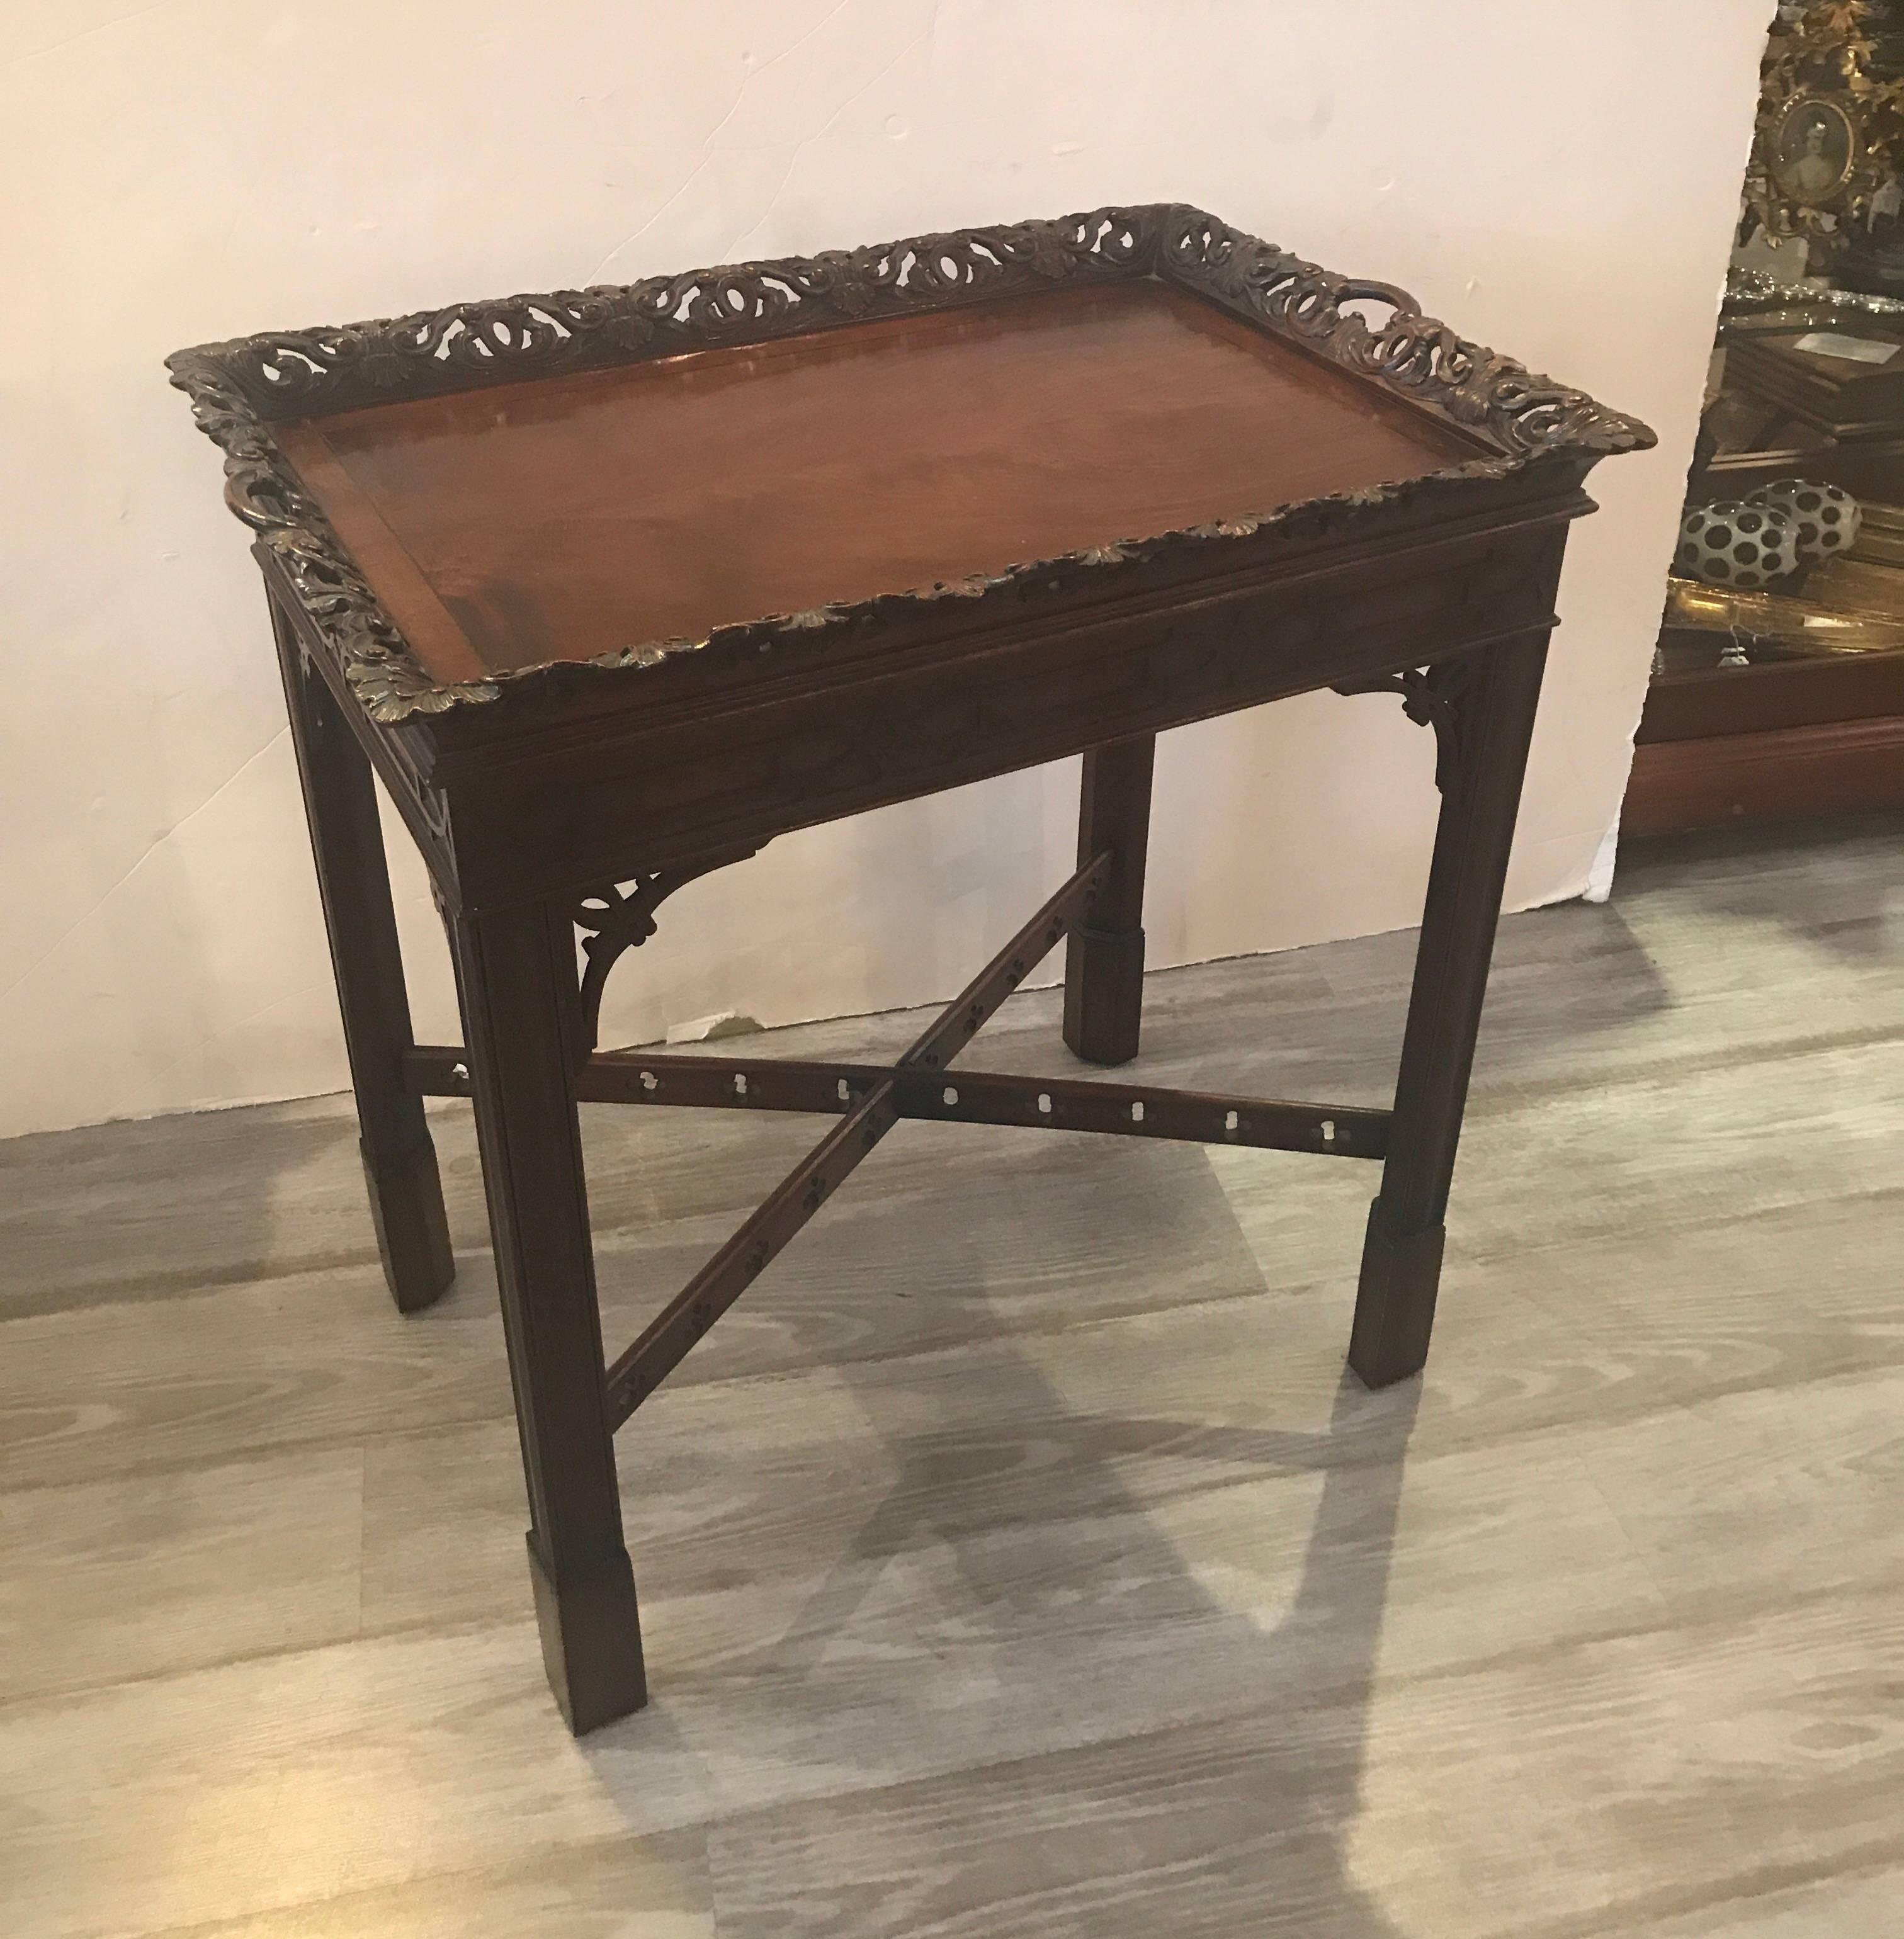 The lift off hand-carved tray top with pierced border. The base with classic Chinese Chippendale styling. The diminutive size is perfect for a tea service, or small bar or dessert server.